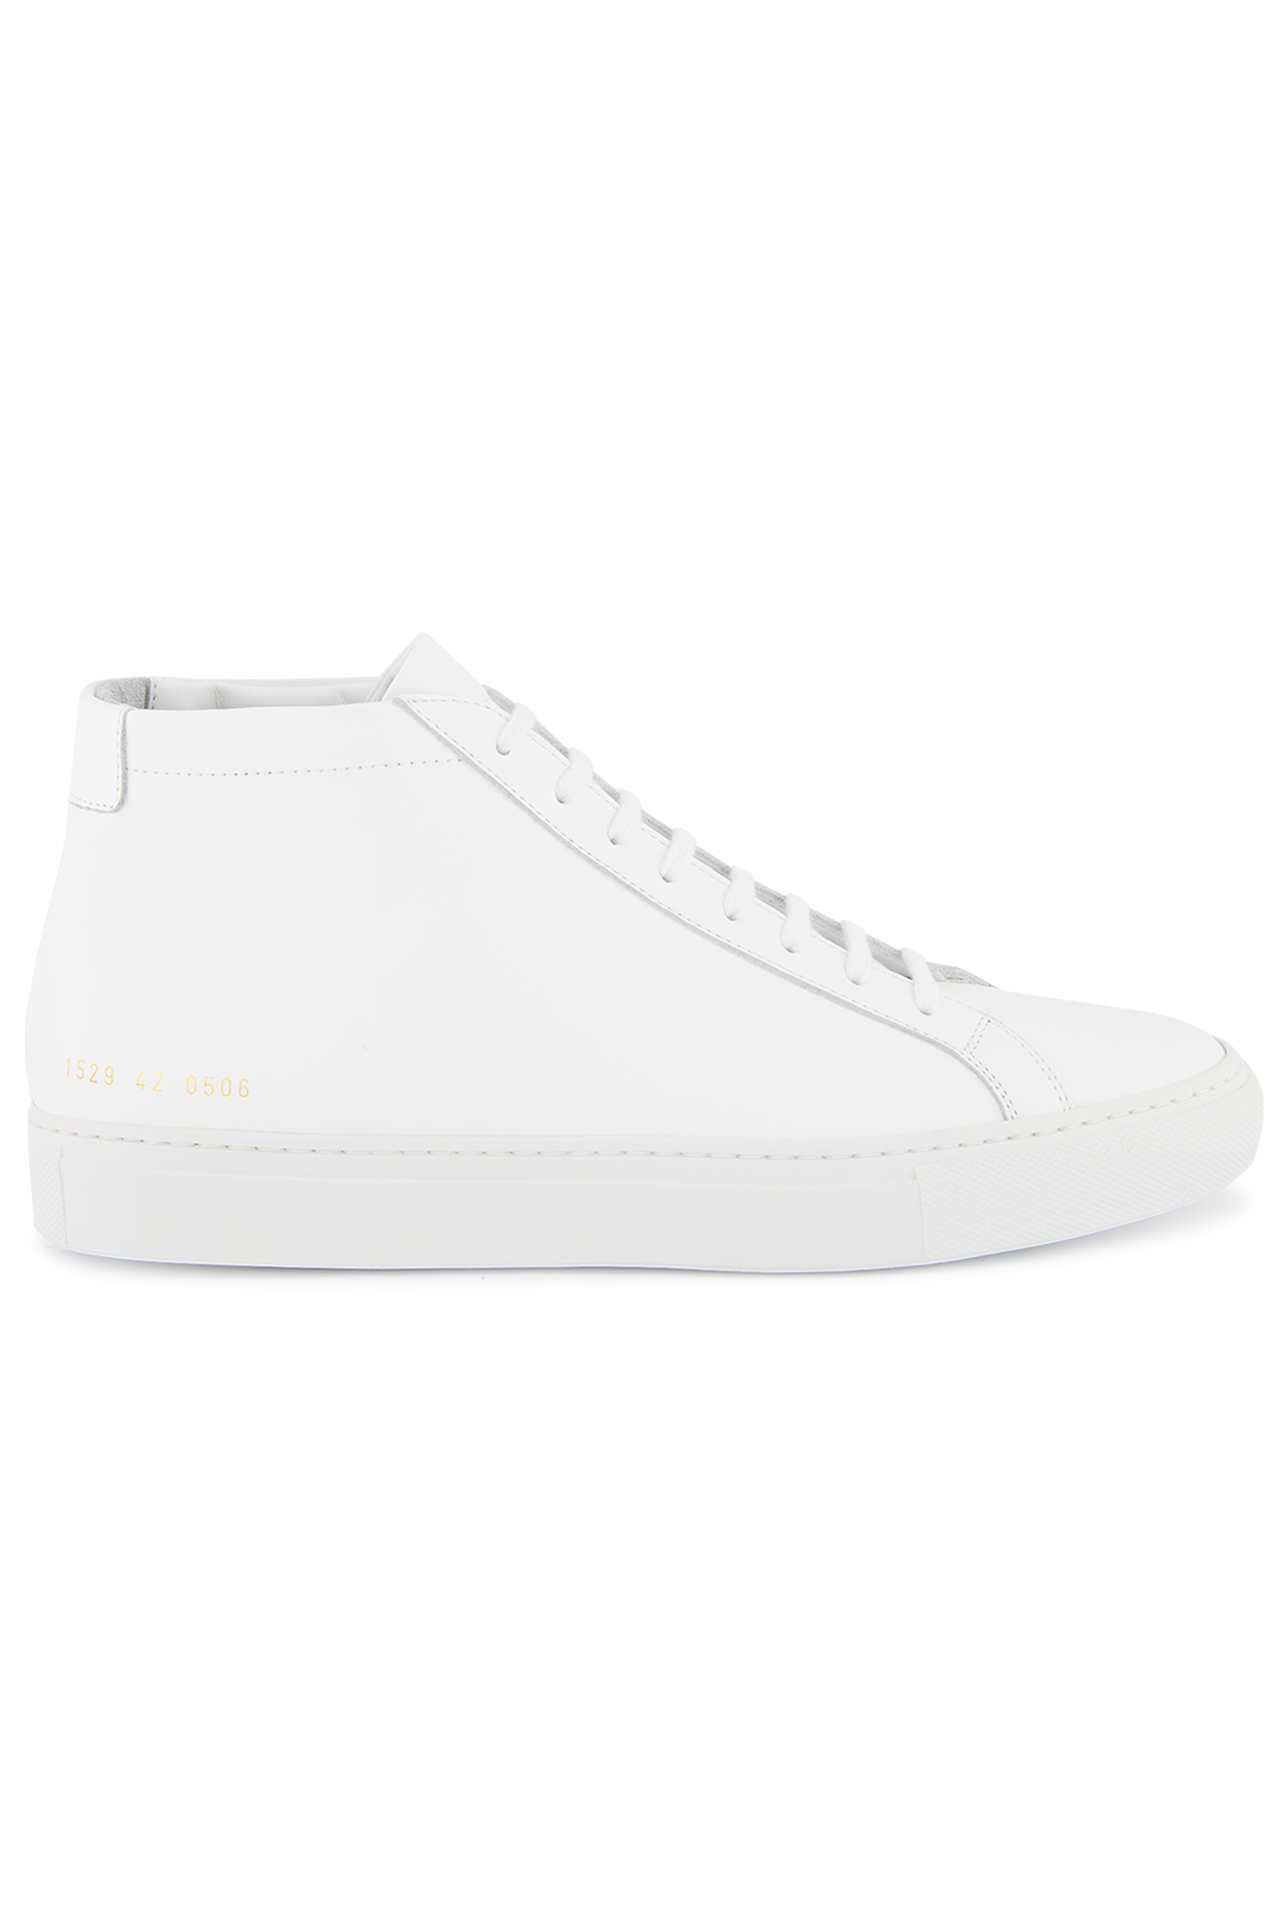 Side view image of Common Projects Original Achilles Mid Sneaker Leather White (600644222987)